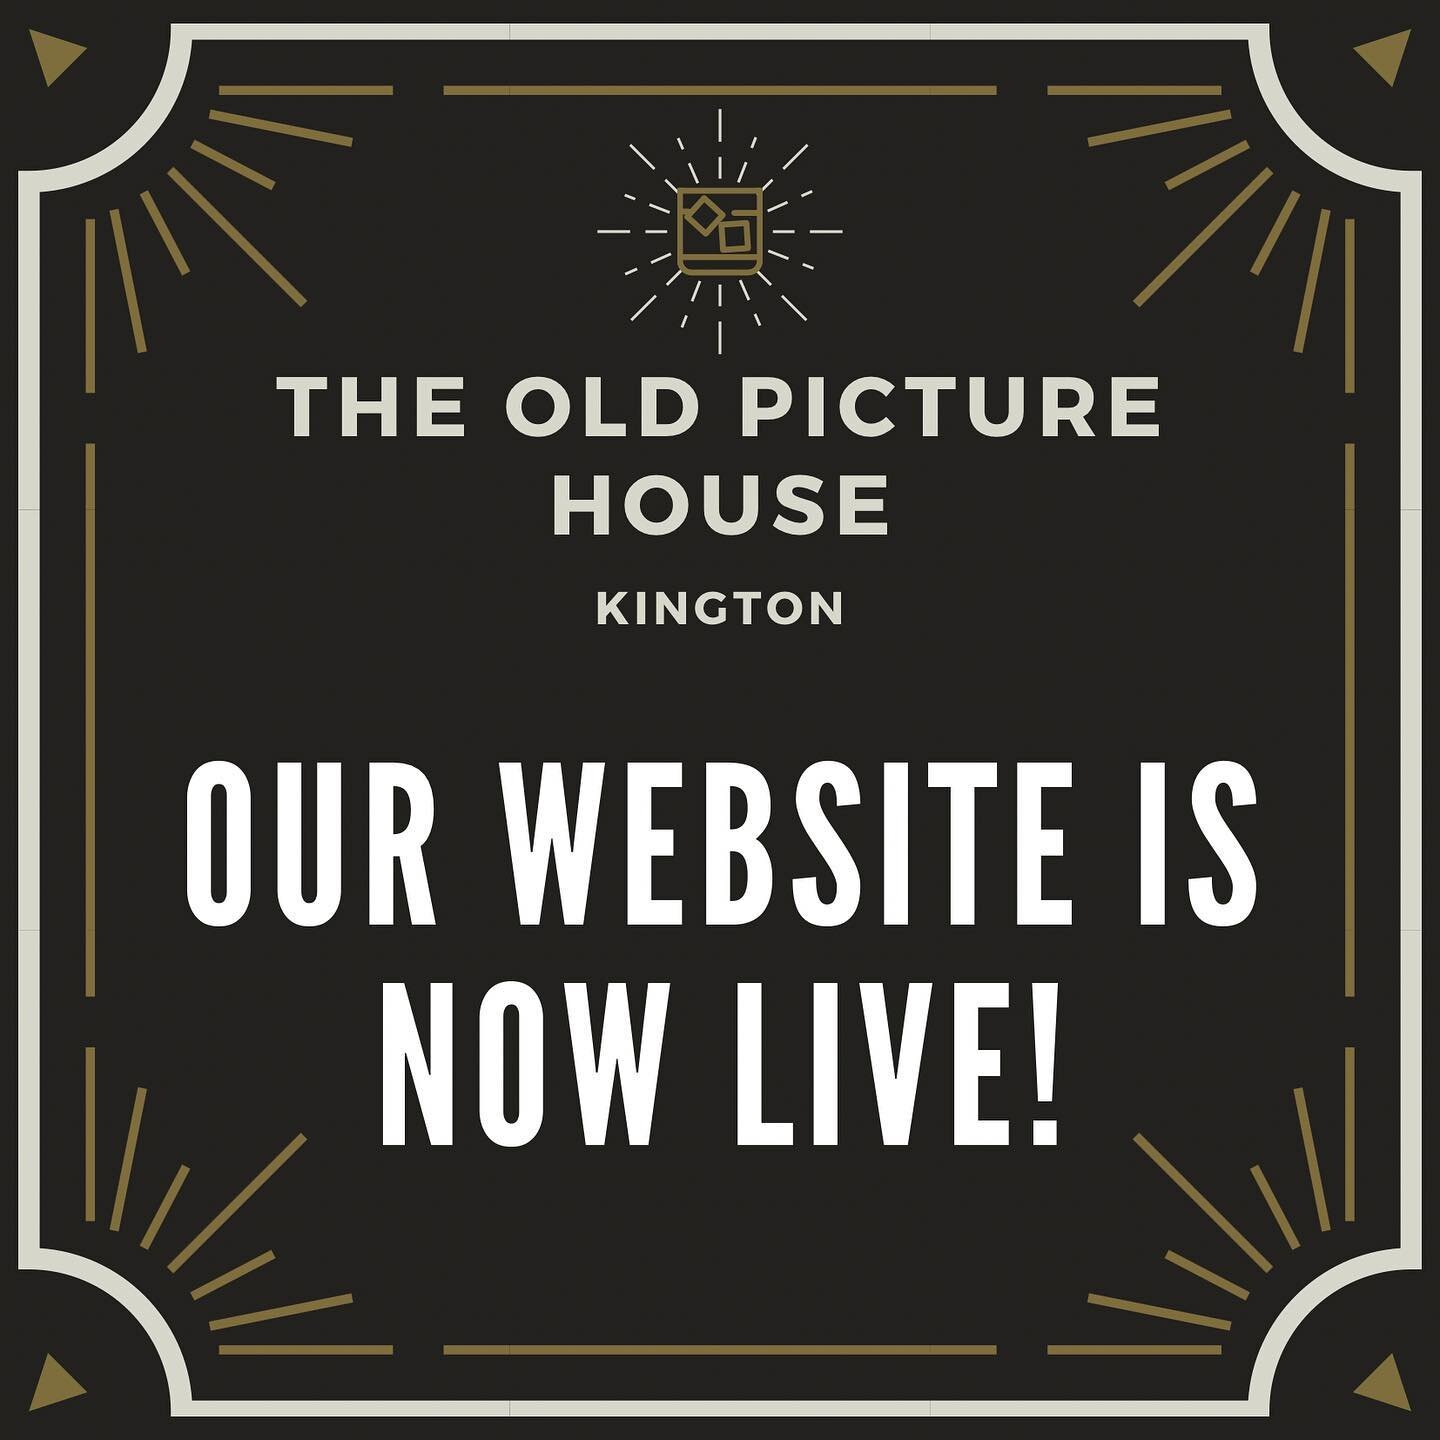 To book an event, arrange a site visit, learn the history of the building, or browse our previous exhibitions, please see our brand spanking new website! Go to our homepage for a direct link, or just copy and paste into your web browser :)

www.theol